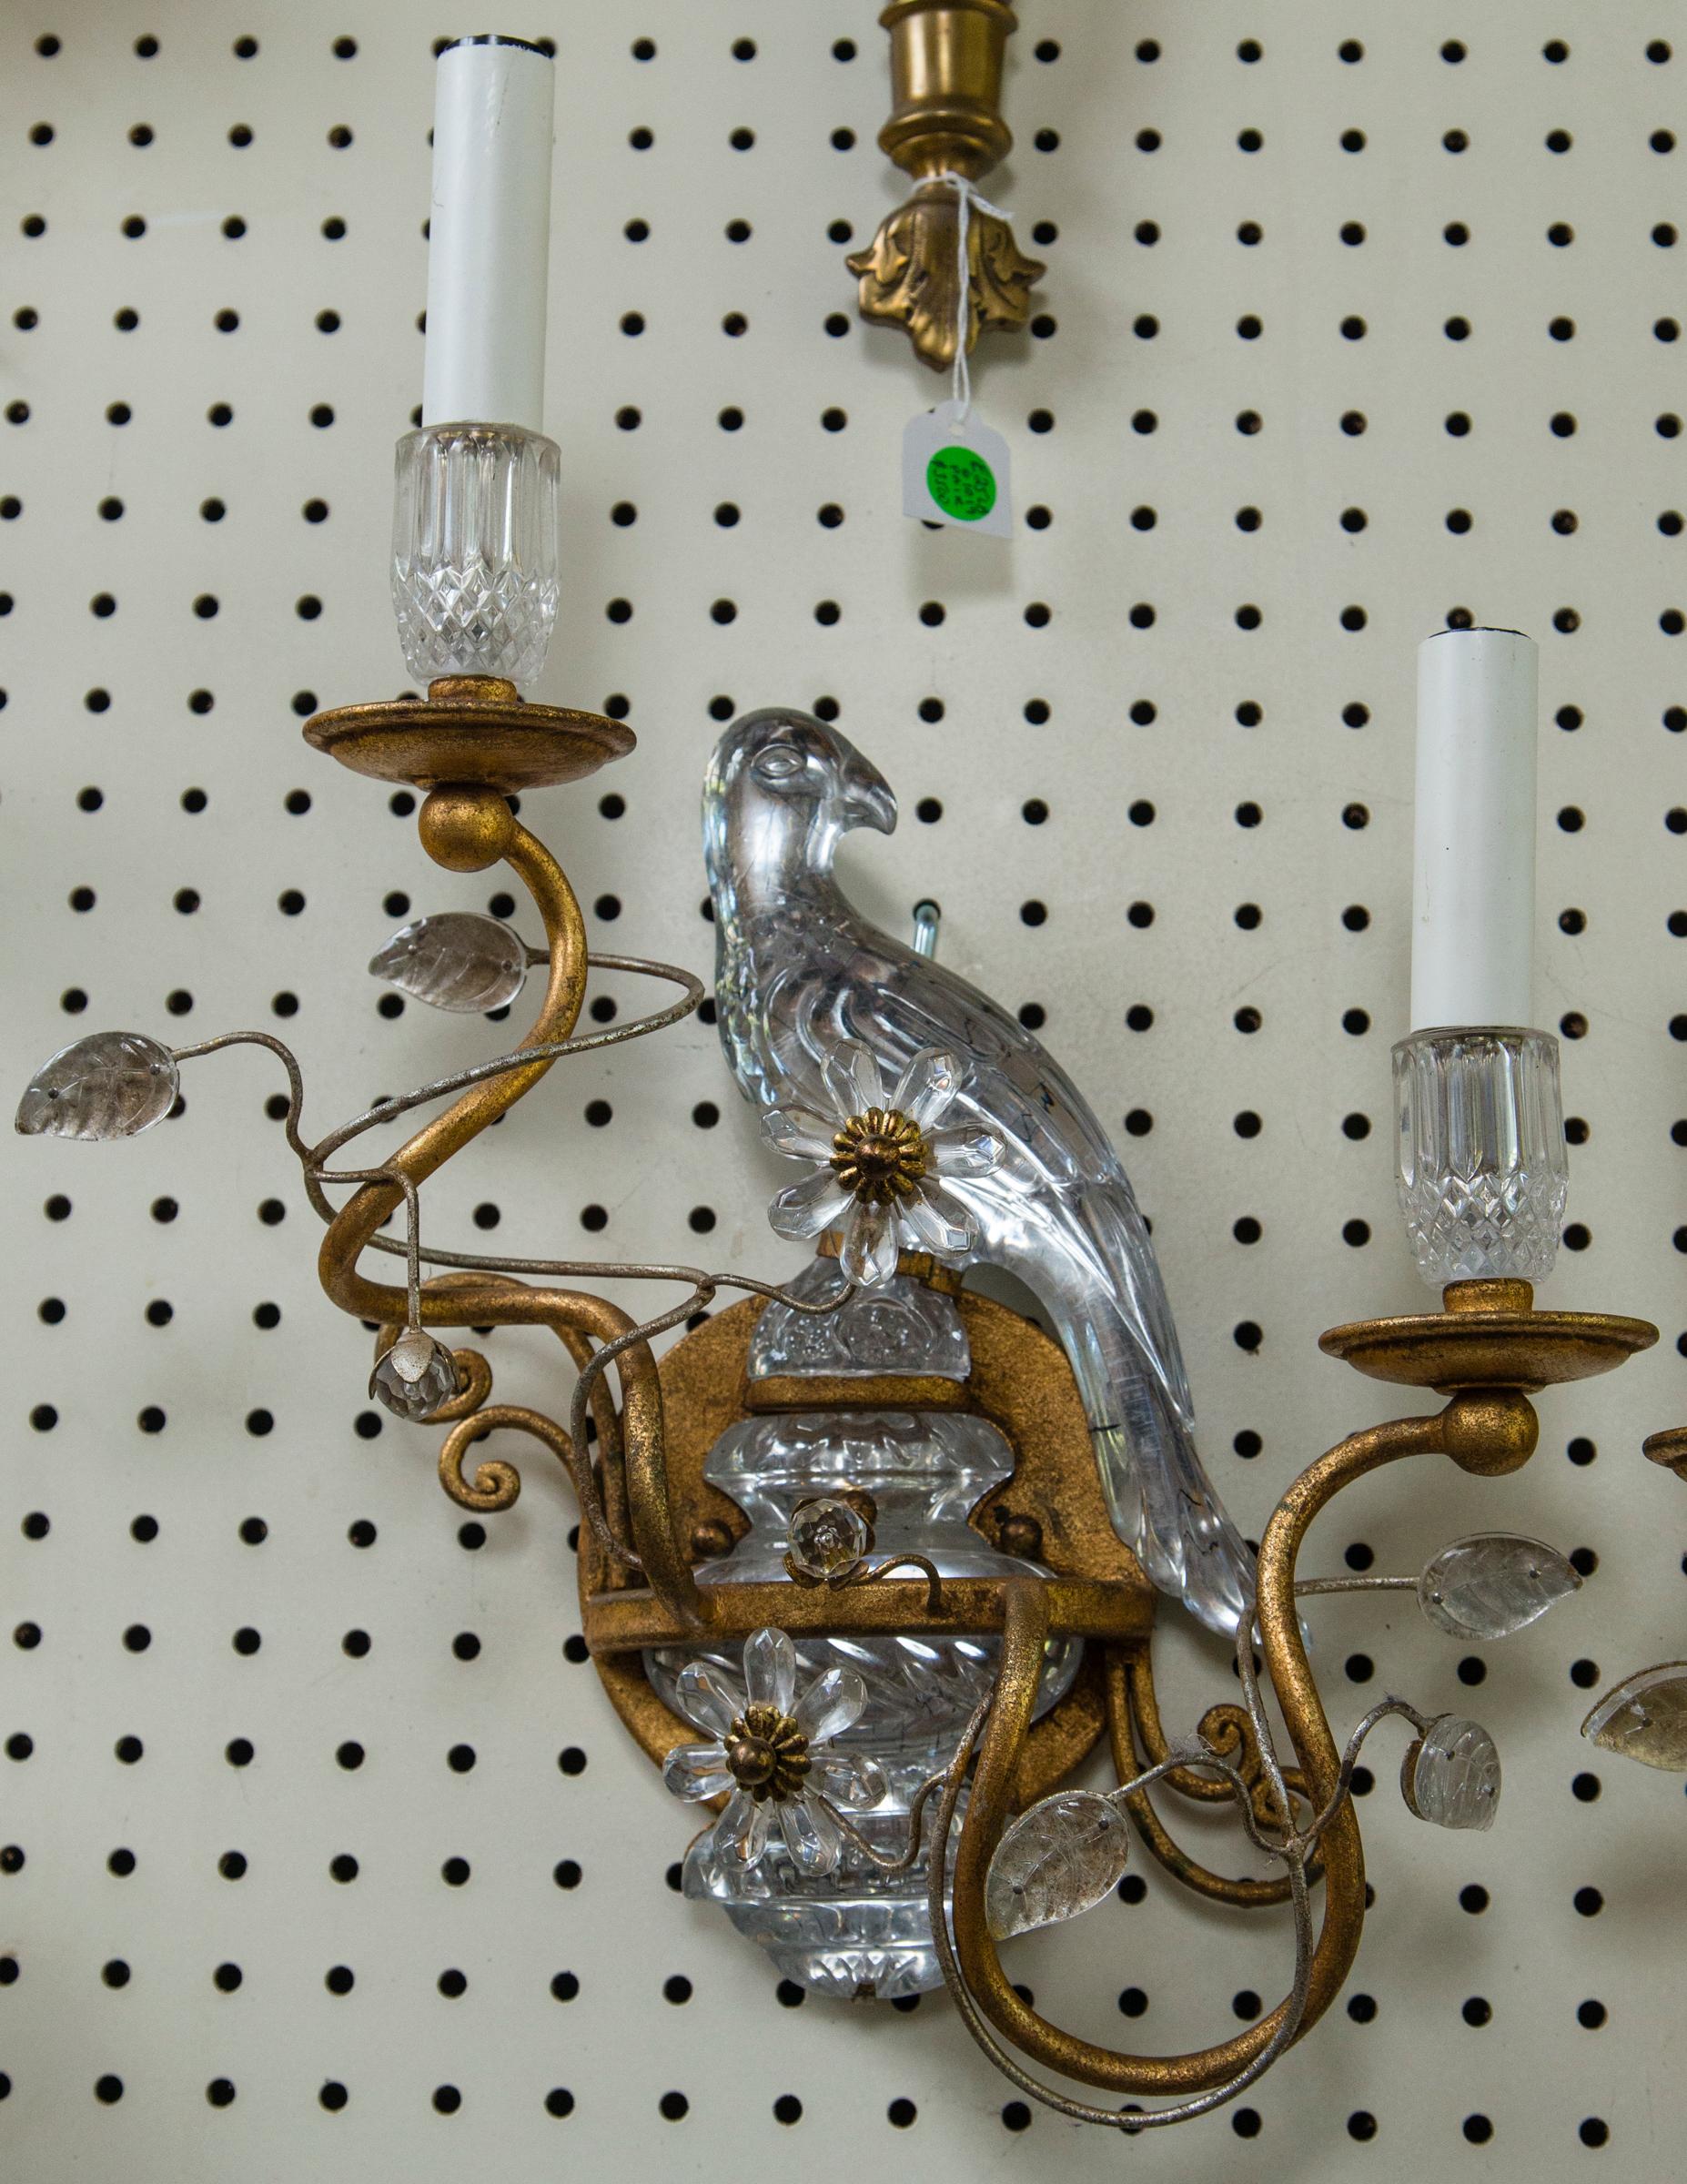 A true pair with each bird facing a different direction. Two arms, baubeches, rosette, and round back plates in gold tone metal. The birds and candle cups in crystal. Wired.